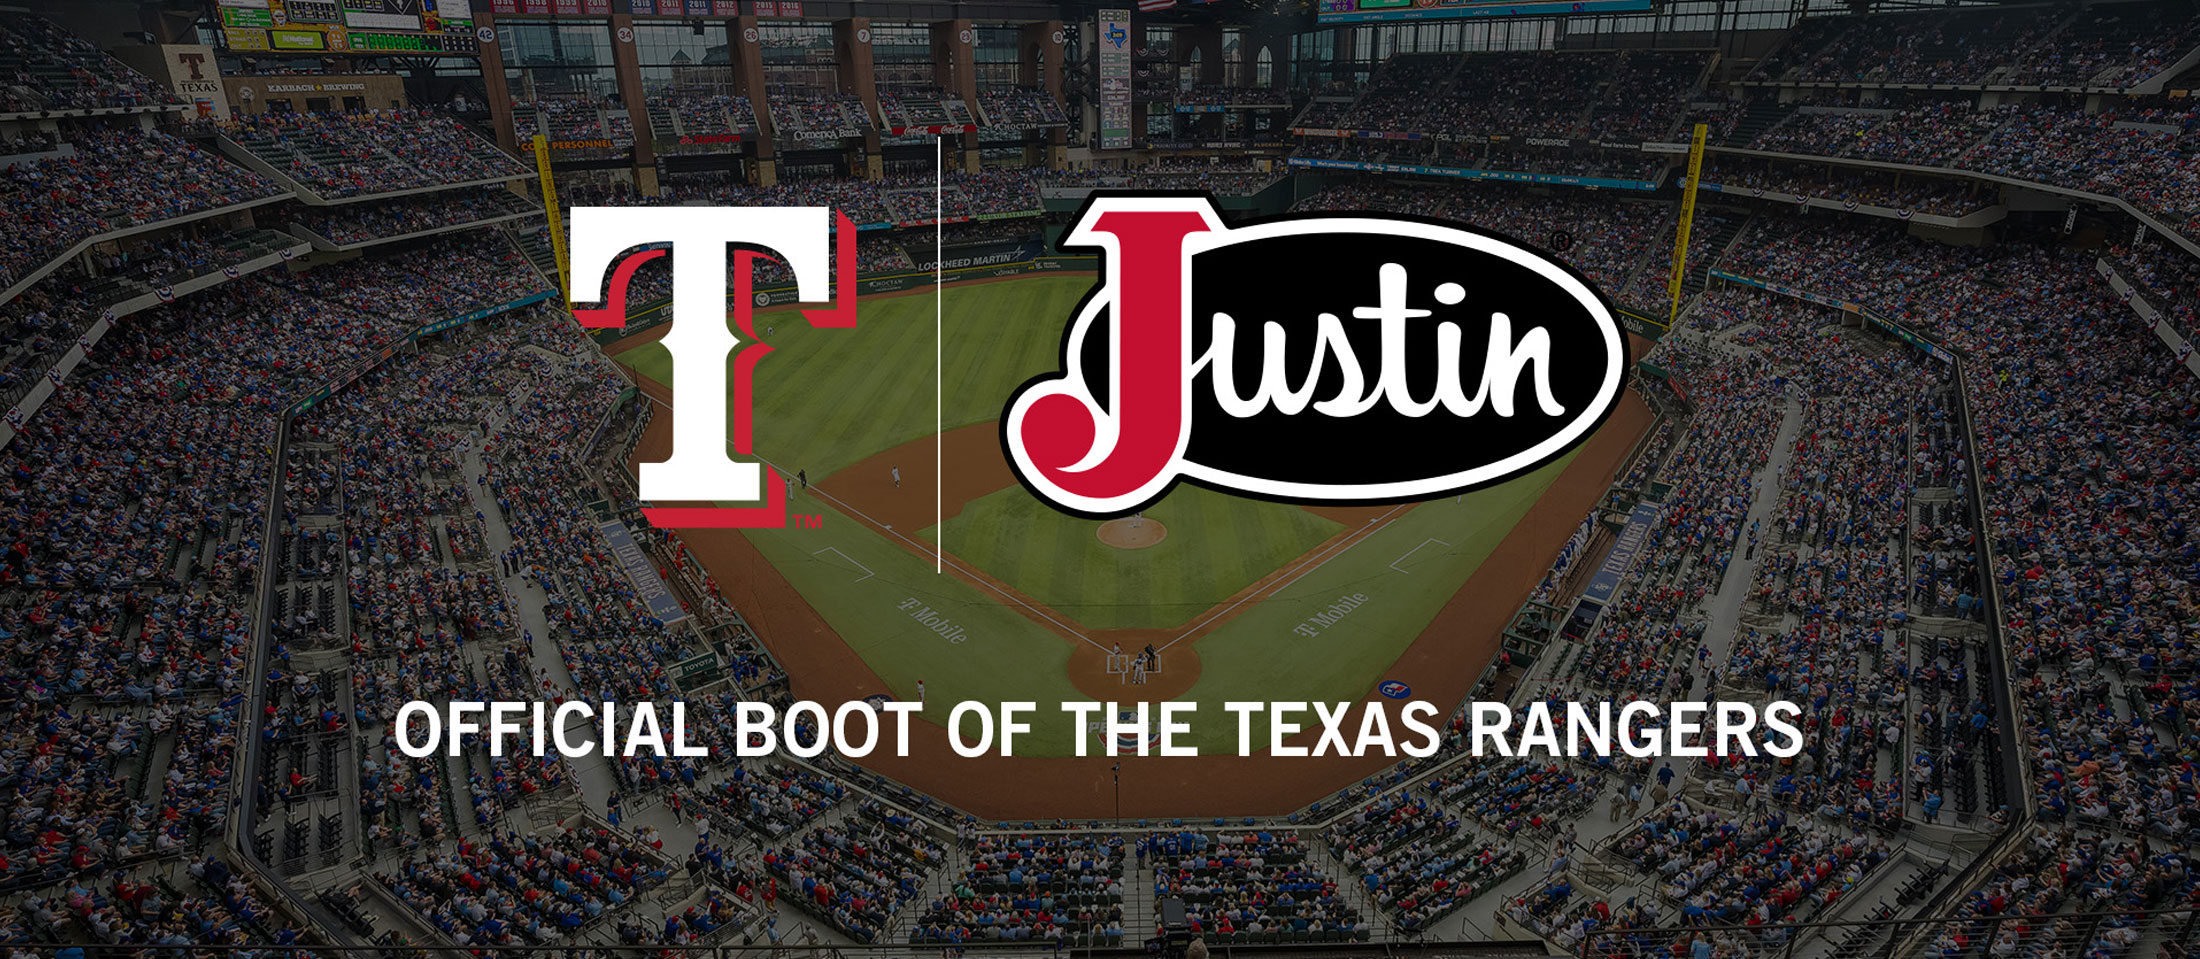 Official Boot of the Texas Rangers. A lock-up logo of Justin’s logo and The Texas Rangers logo with the words “Official Boots of the Texas Rangers” with a picture of Globe Life Field in the background.